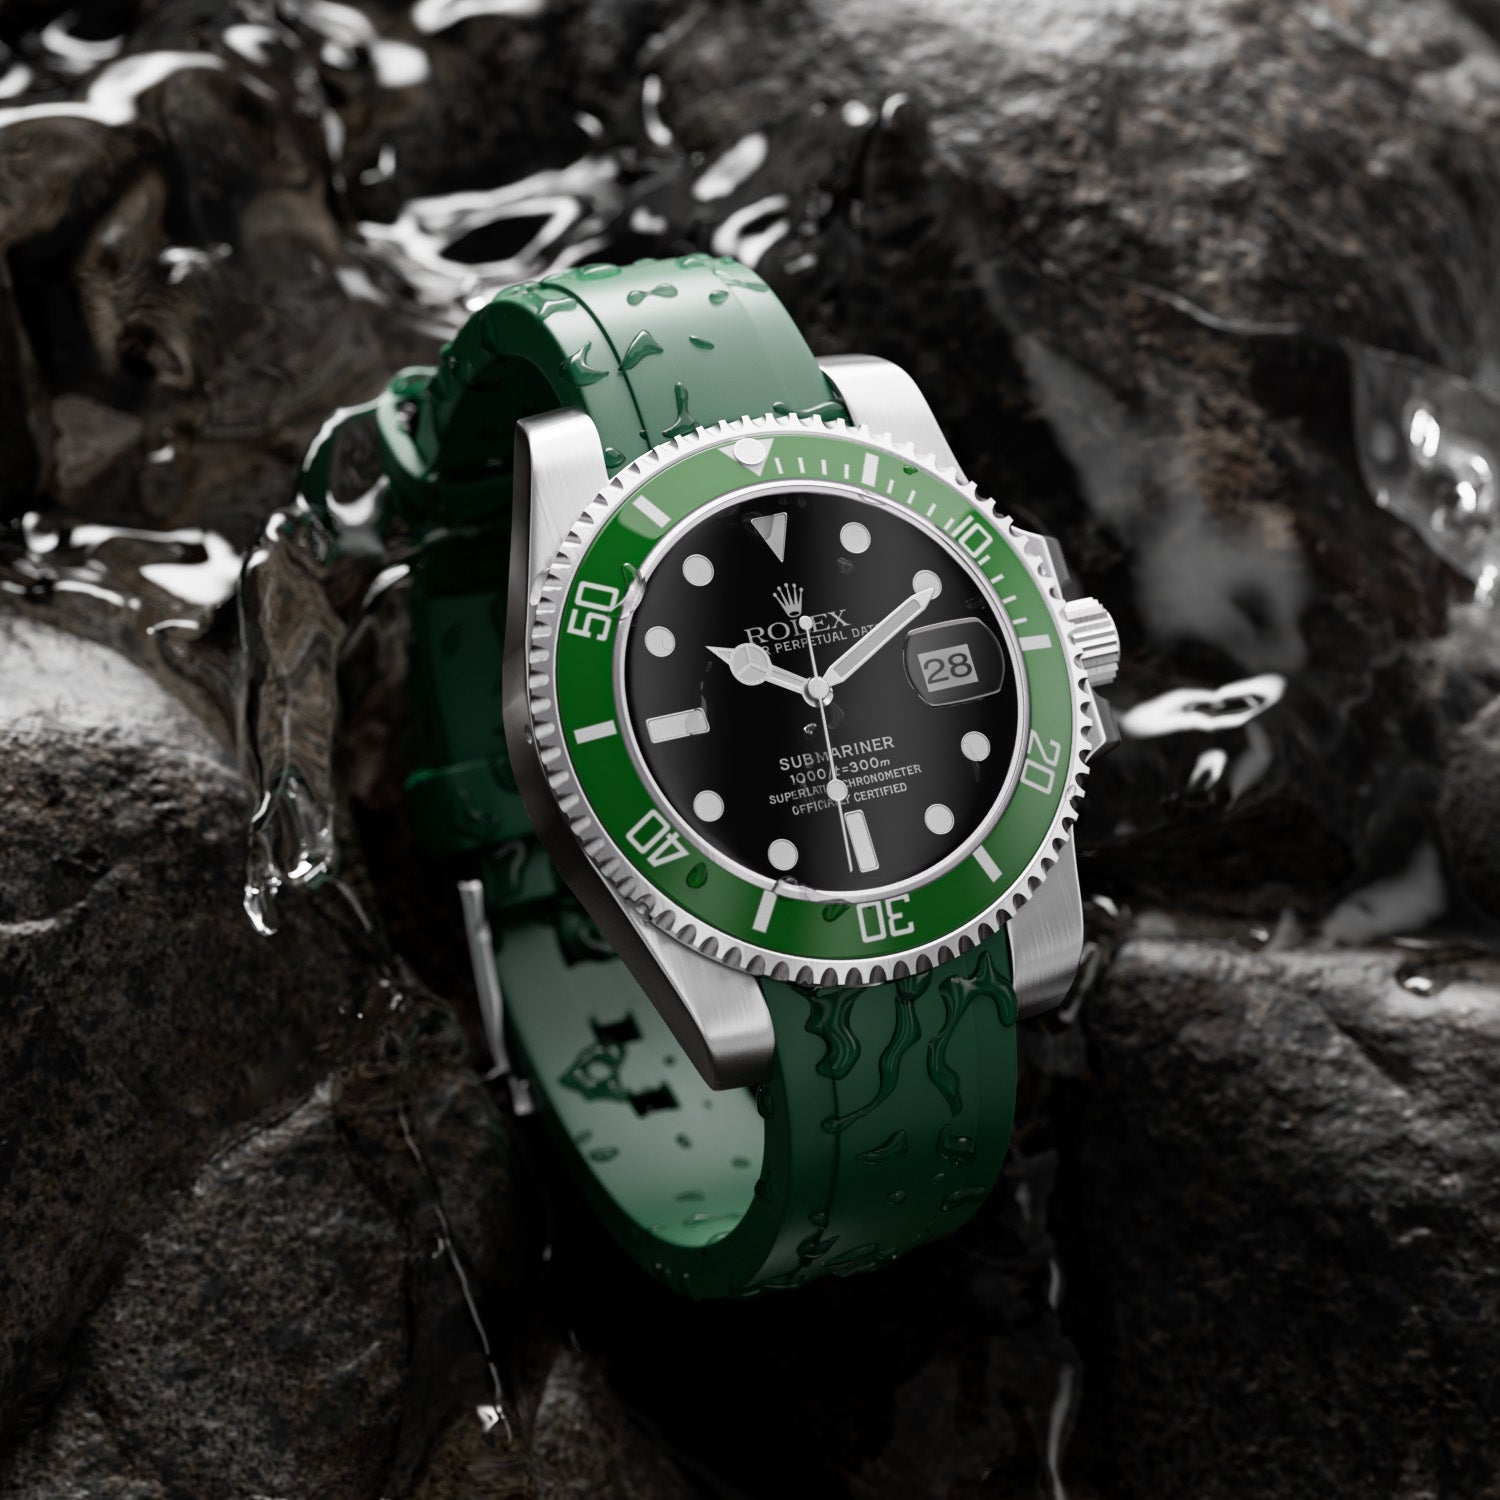 Curved End Soft Silicone Strap - Compatible with Rolex Submariner - Dark Green (2418) -StrapSeeker